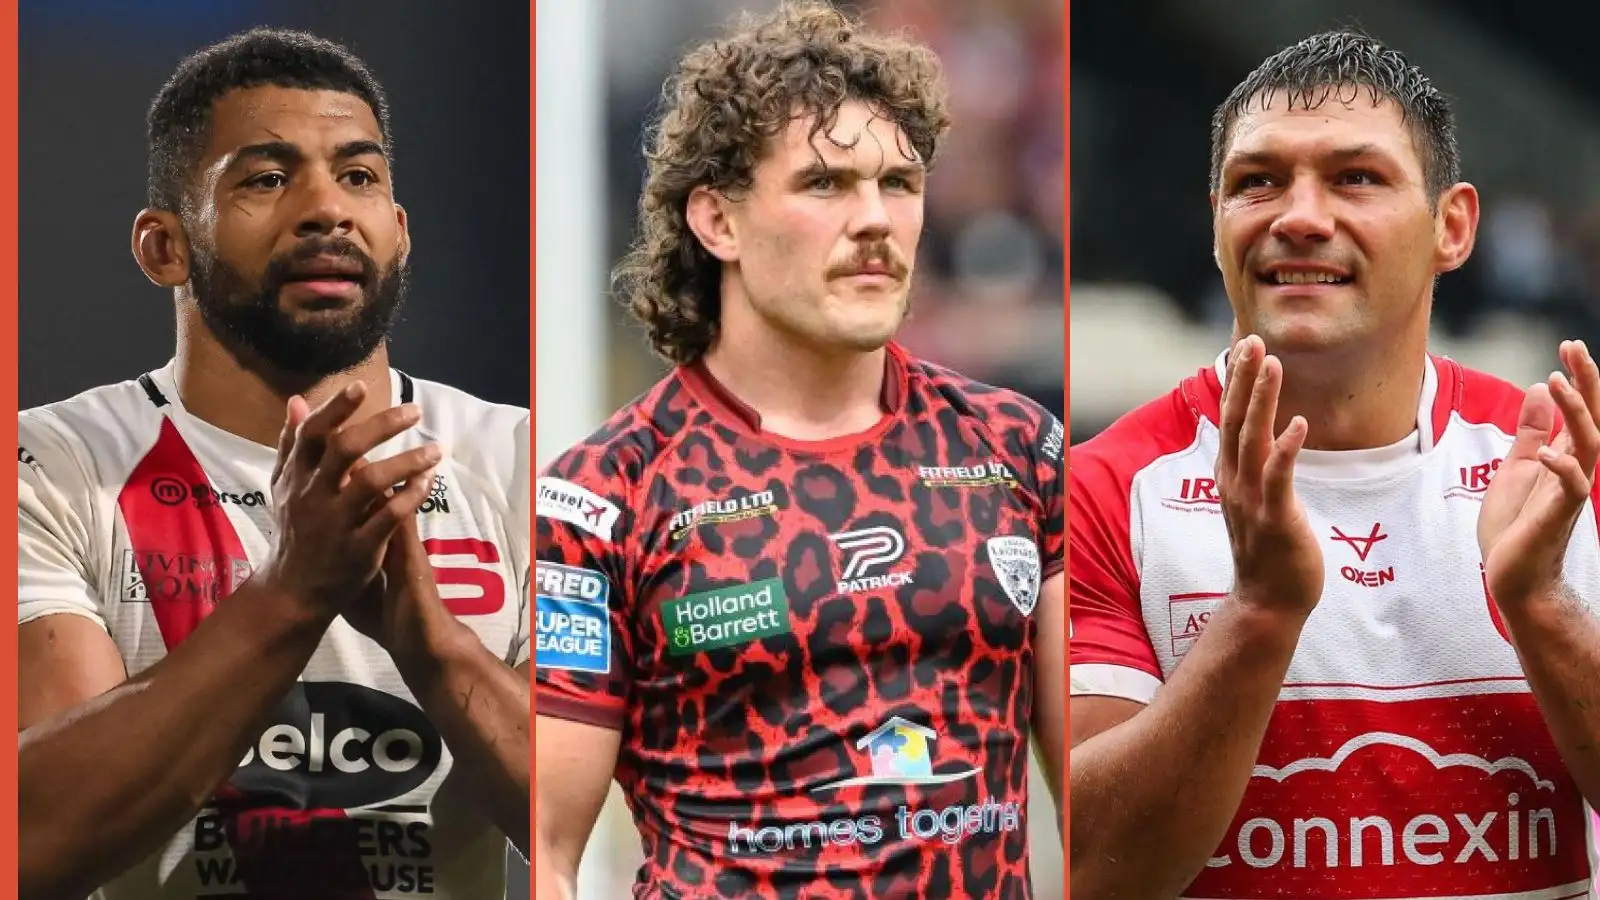 Leeds Rhinos’ influence across Super League underlined by ridiculous team of former players